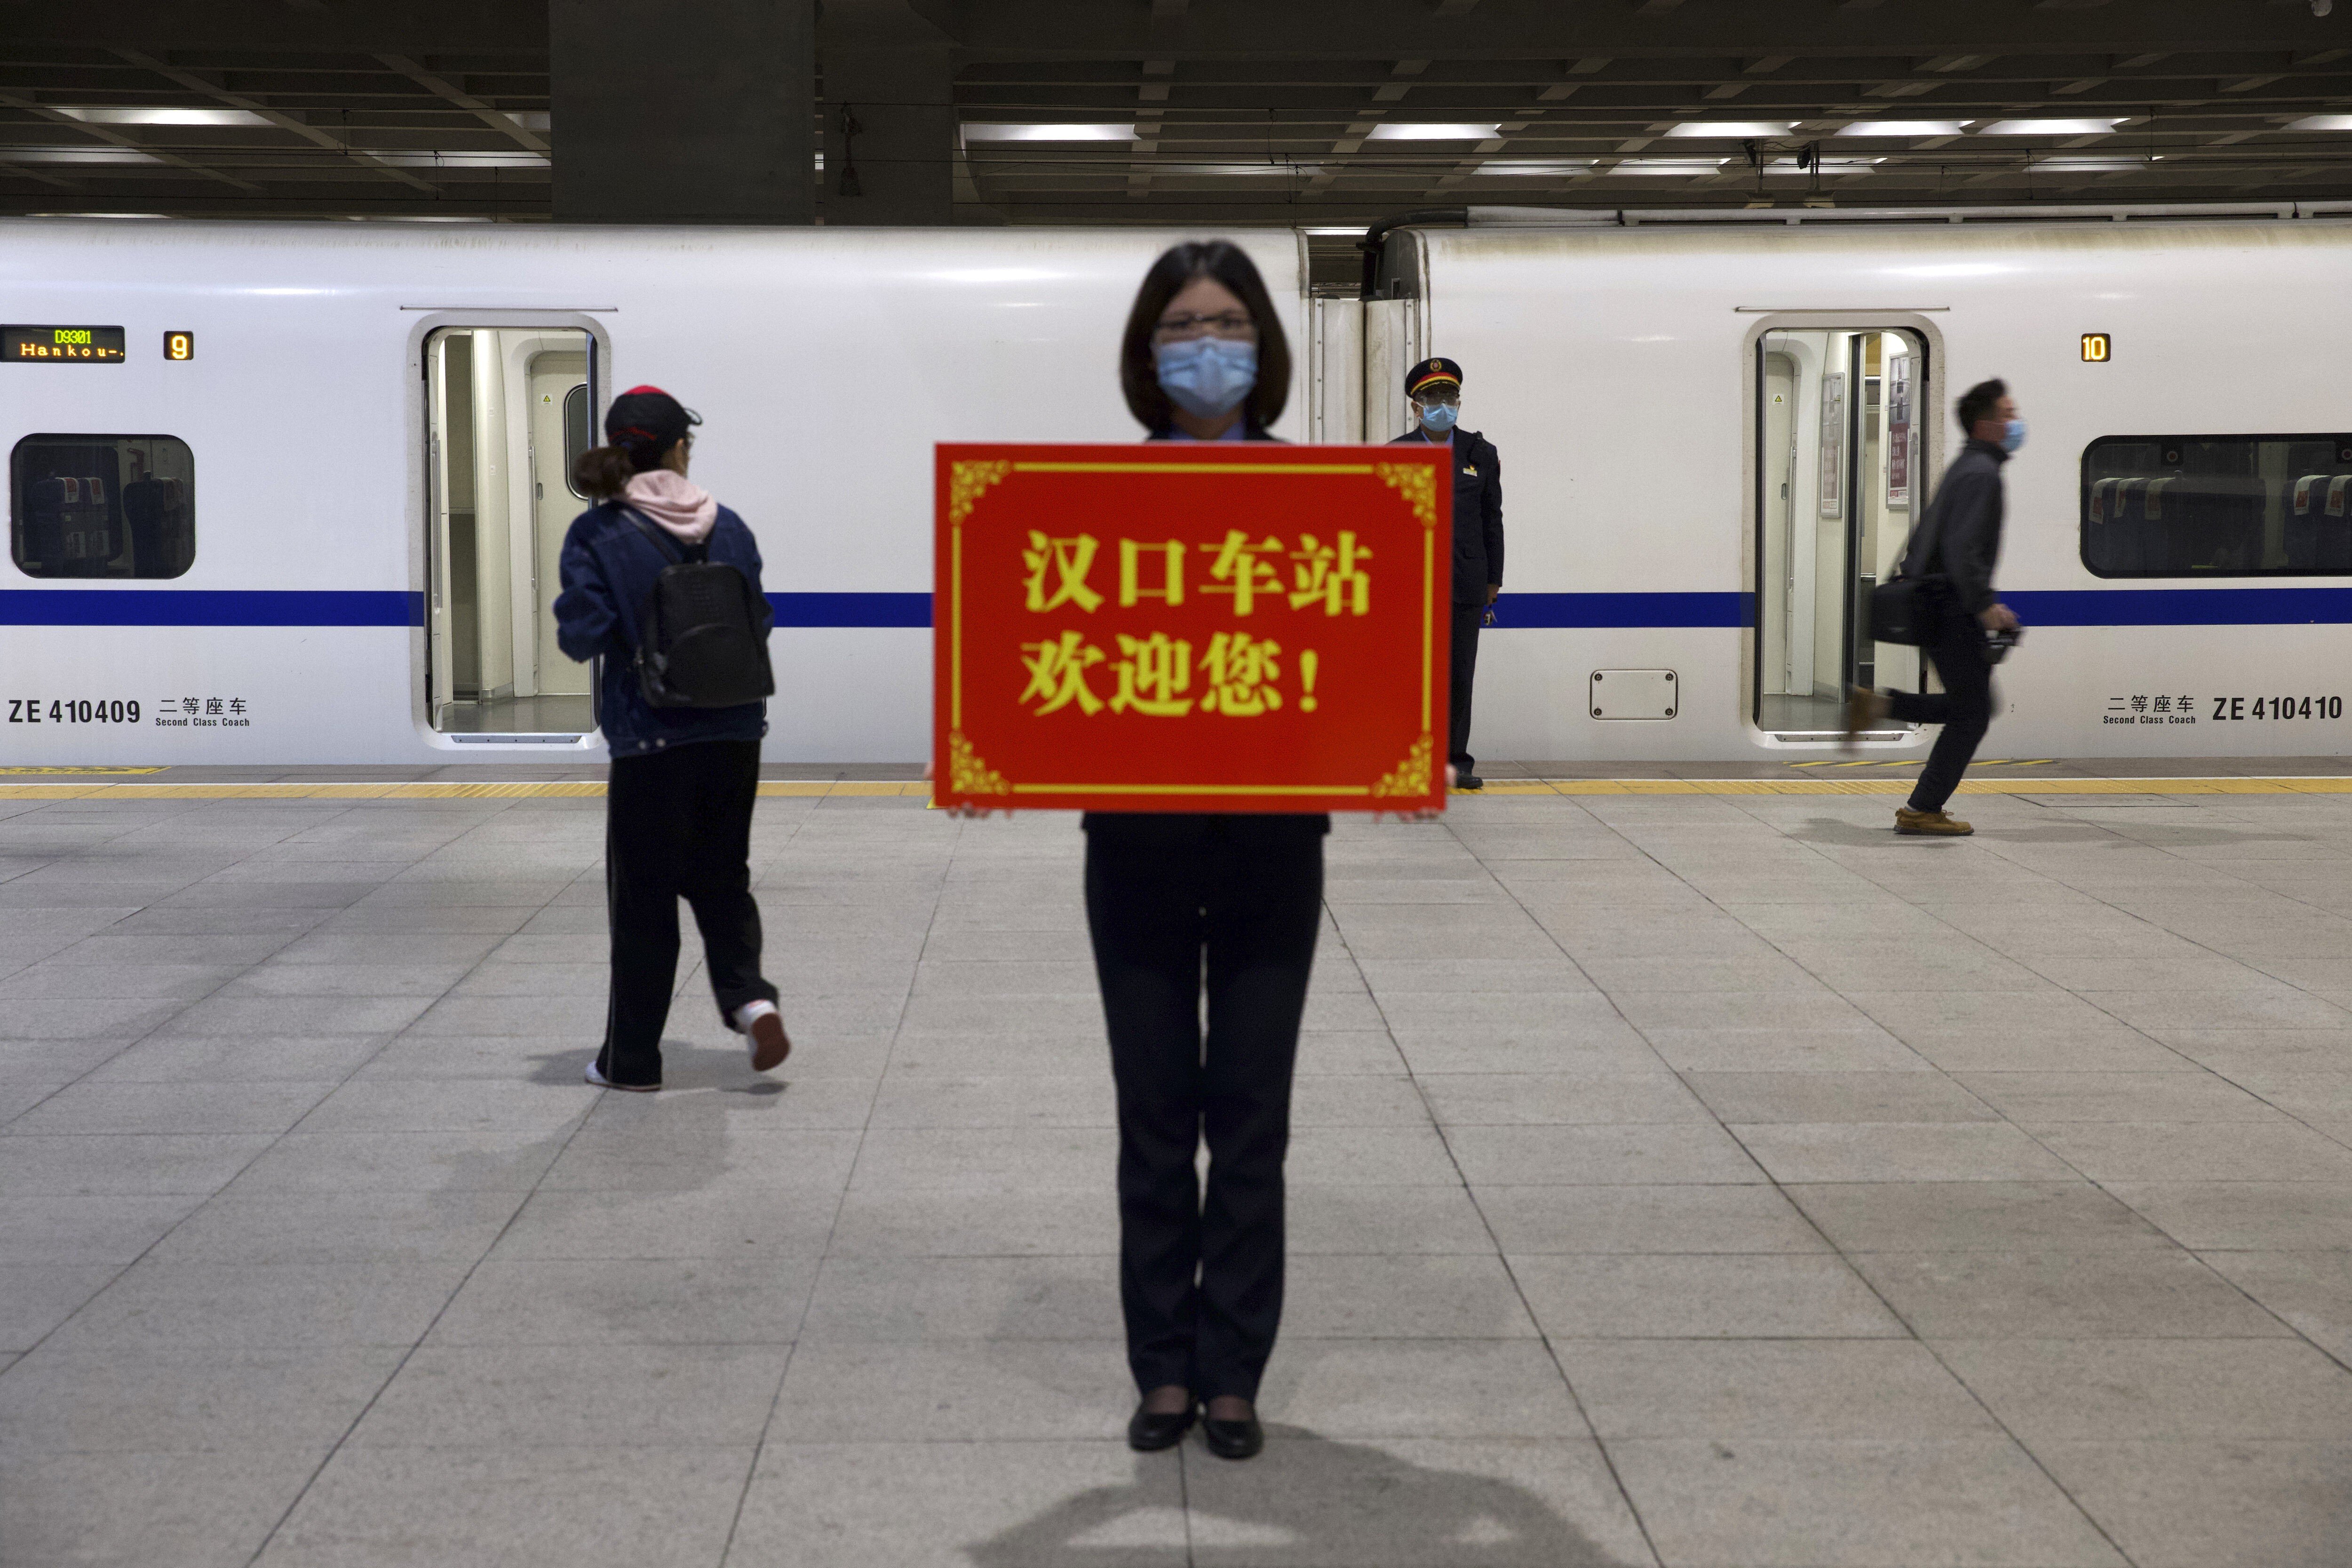 A railway worker holds a sign reading “Hankou Station welcomes you!” as passengers board the first high-speed train to leave after the resumption of services in Wuhan, Hubei, on April 8, after 11 weeks of lockdown. Photo: AP